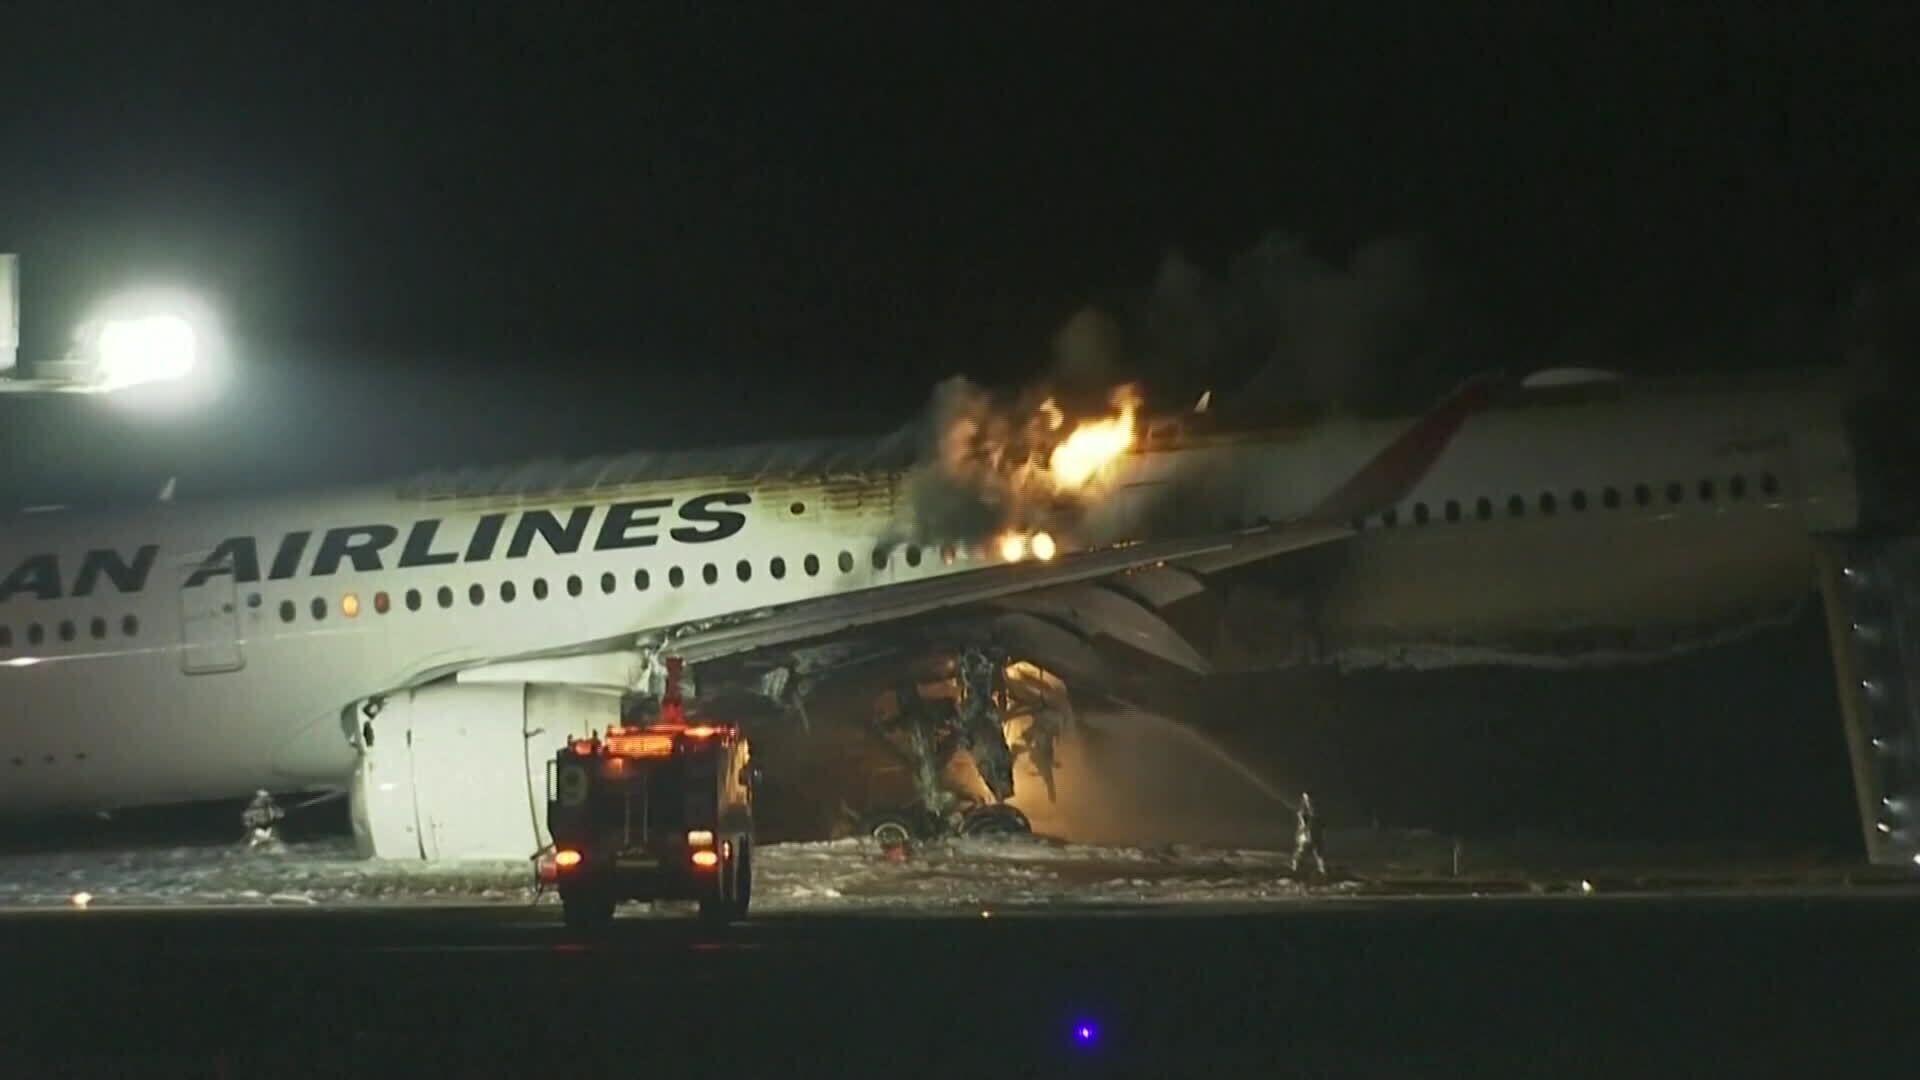 Japan Airlines Flight Was Cleared to Land Before Fiery Collision at ...